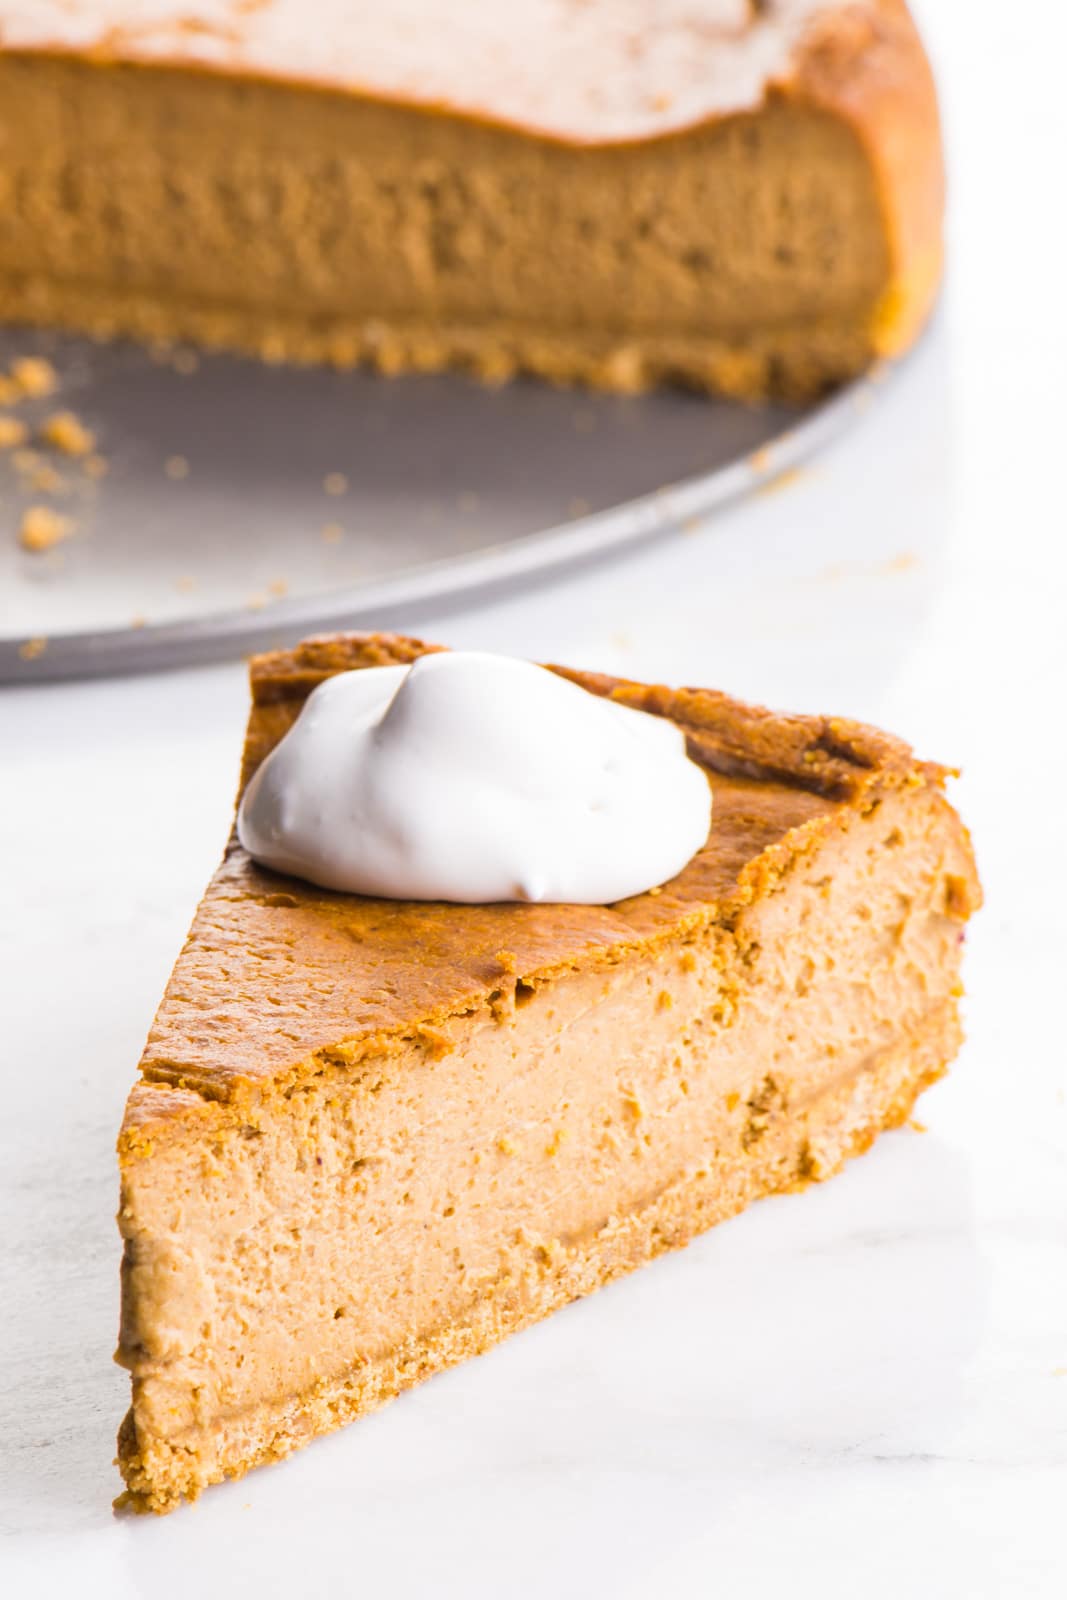 A slice of vegan pumpkin cheesecake is on a plate with vegan whipped cream on top. The rest of the cheesecake is behind it.